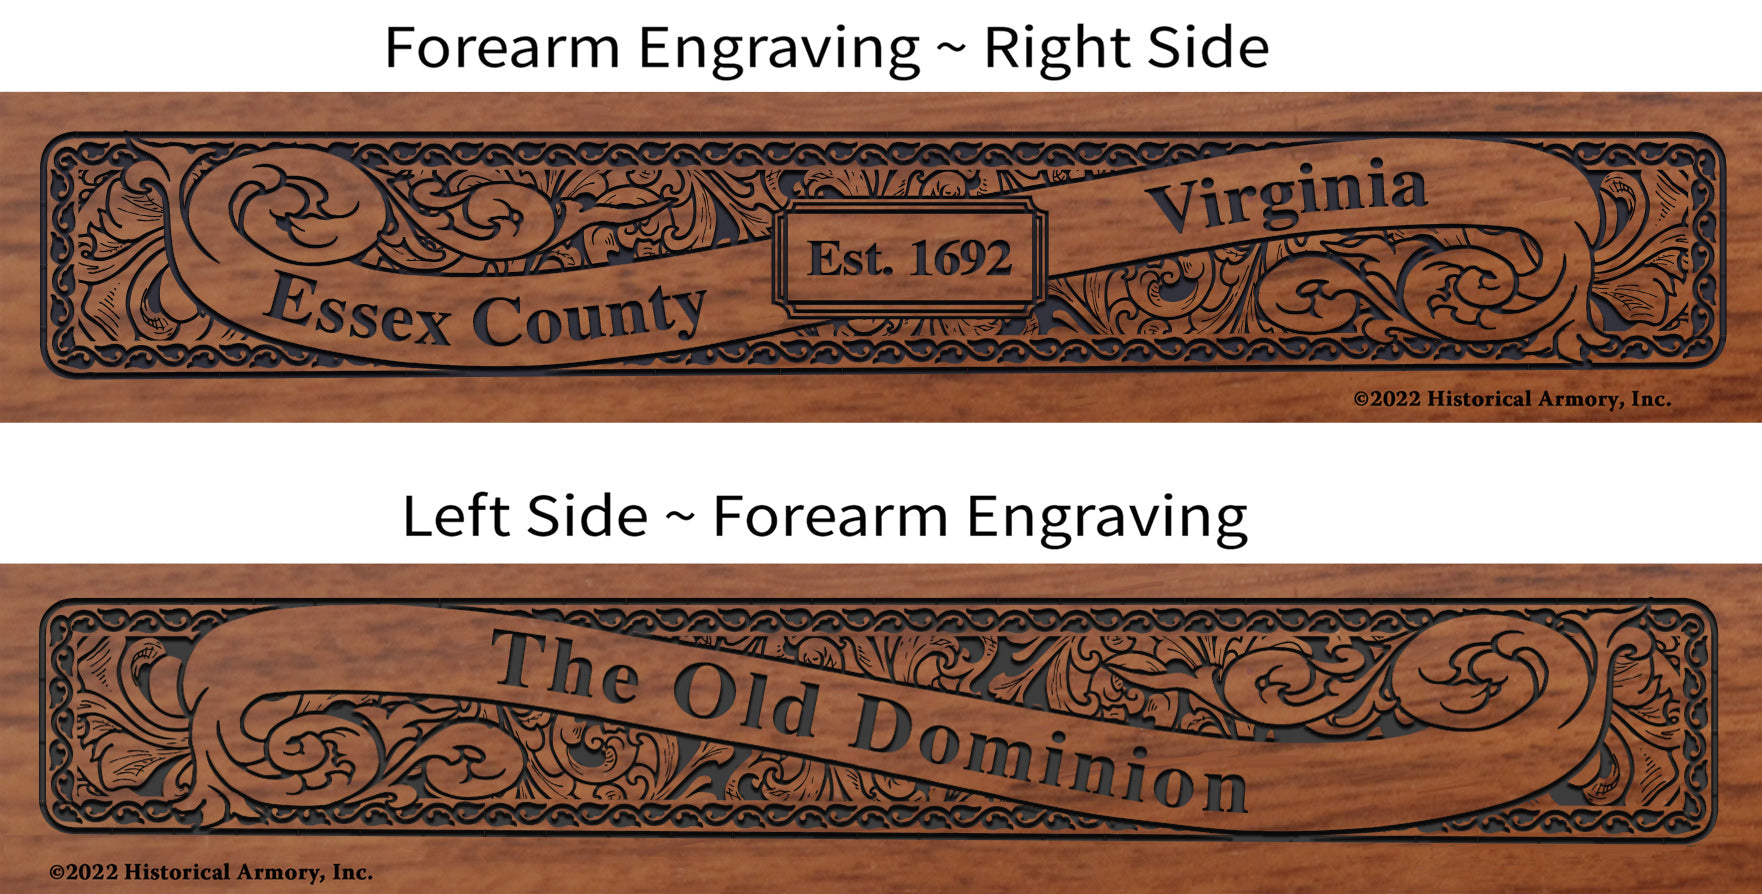 Essex County Virginia Engraved Rifle Forearm